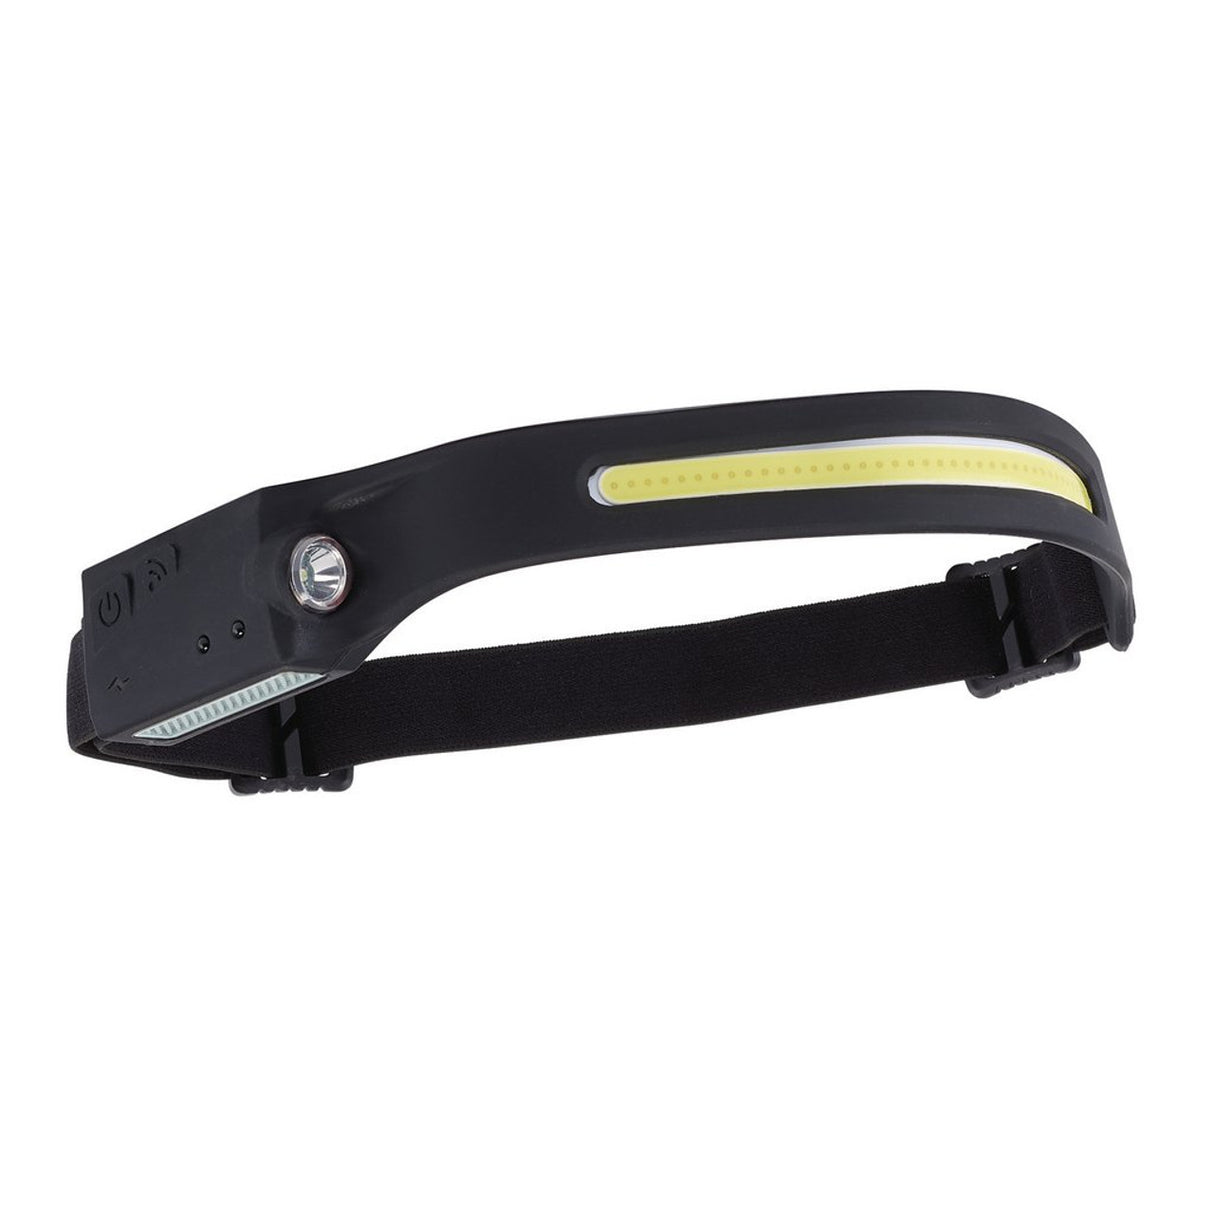 Draper Tools Cob Led Rechargeable 2-In-1 Head Torch With Wave Sensor, 3W, Usb-C Cable Supplied